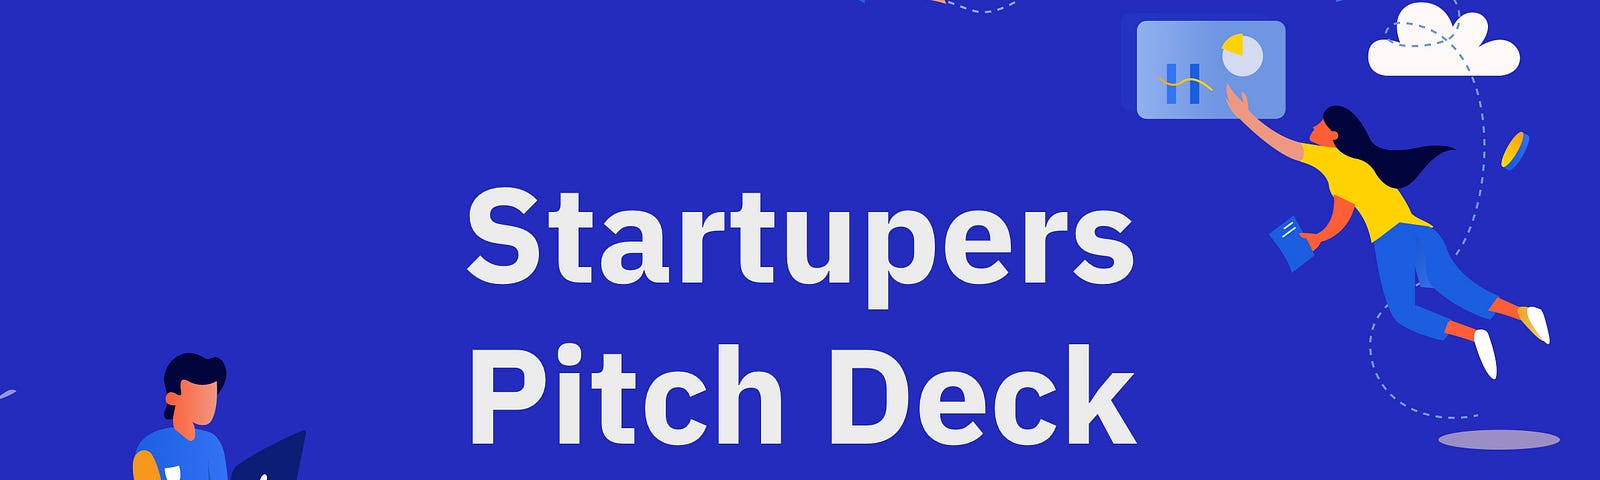 Startupers public pitch deck